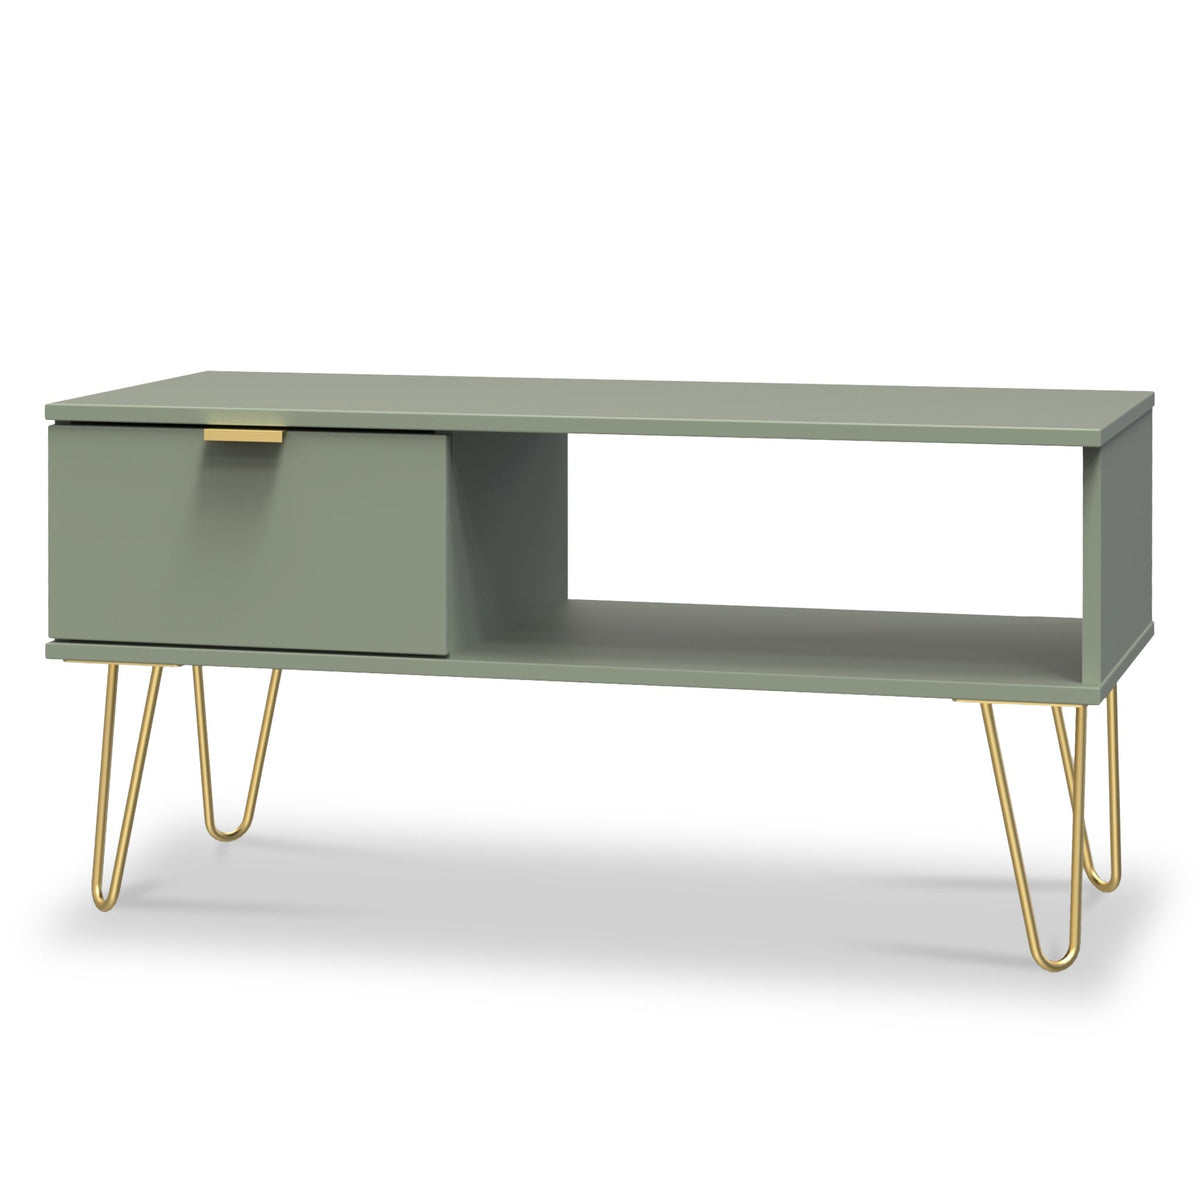 Moreno Olive Green 1 Drawer Coffee Table with Storage and gold hairpin legs